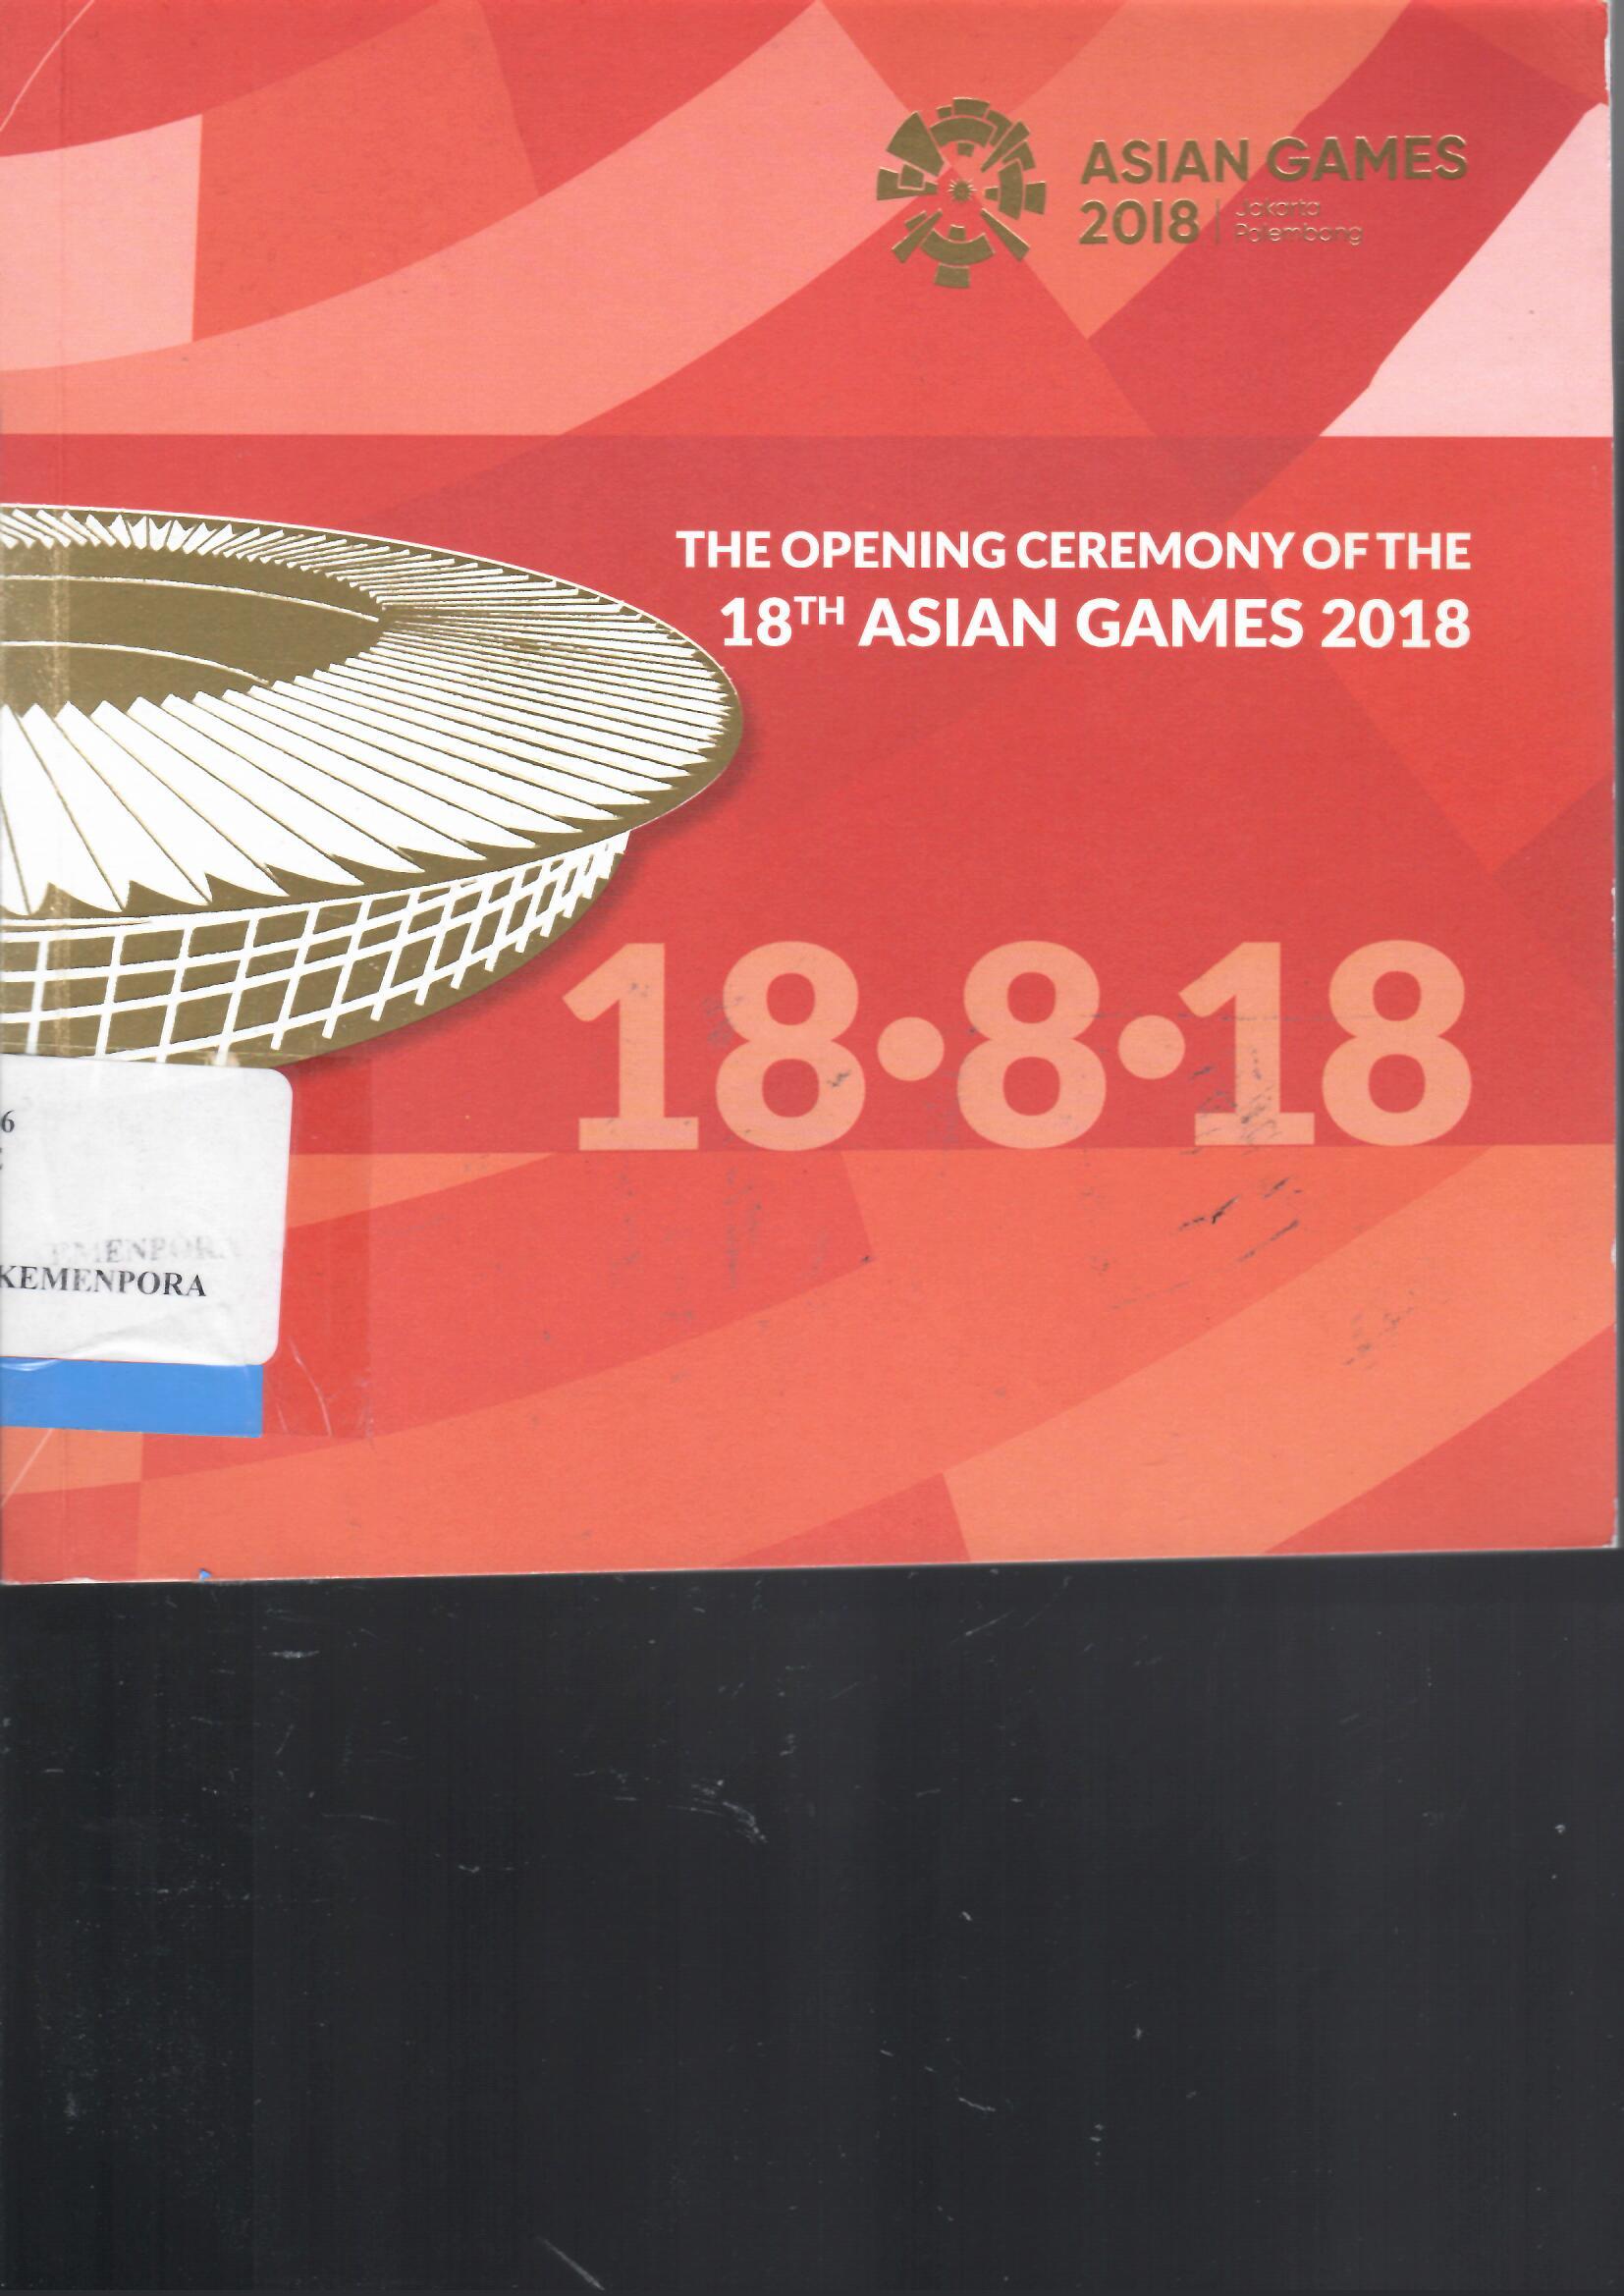 The Opening Ceremony of The 18TH Asian Games 2018